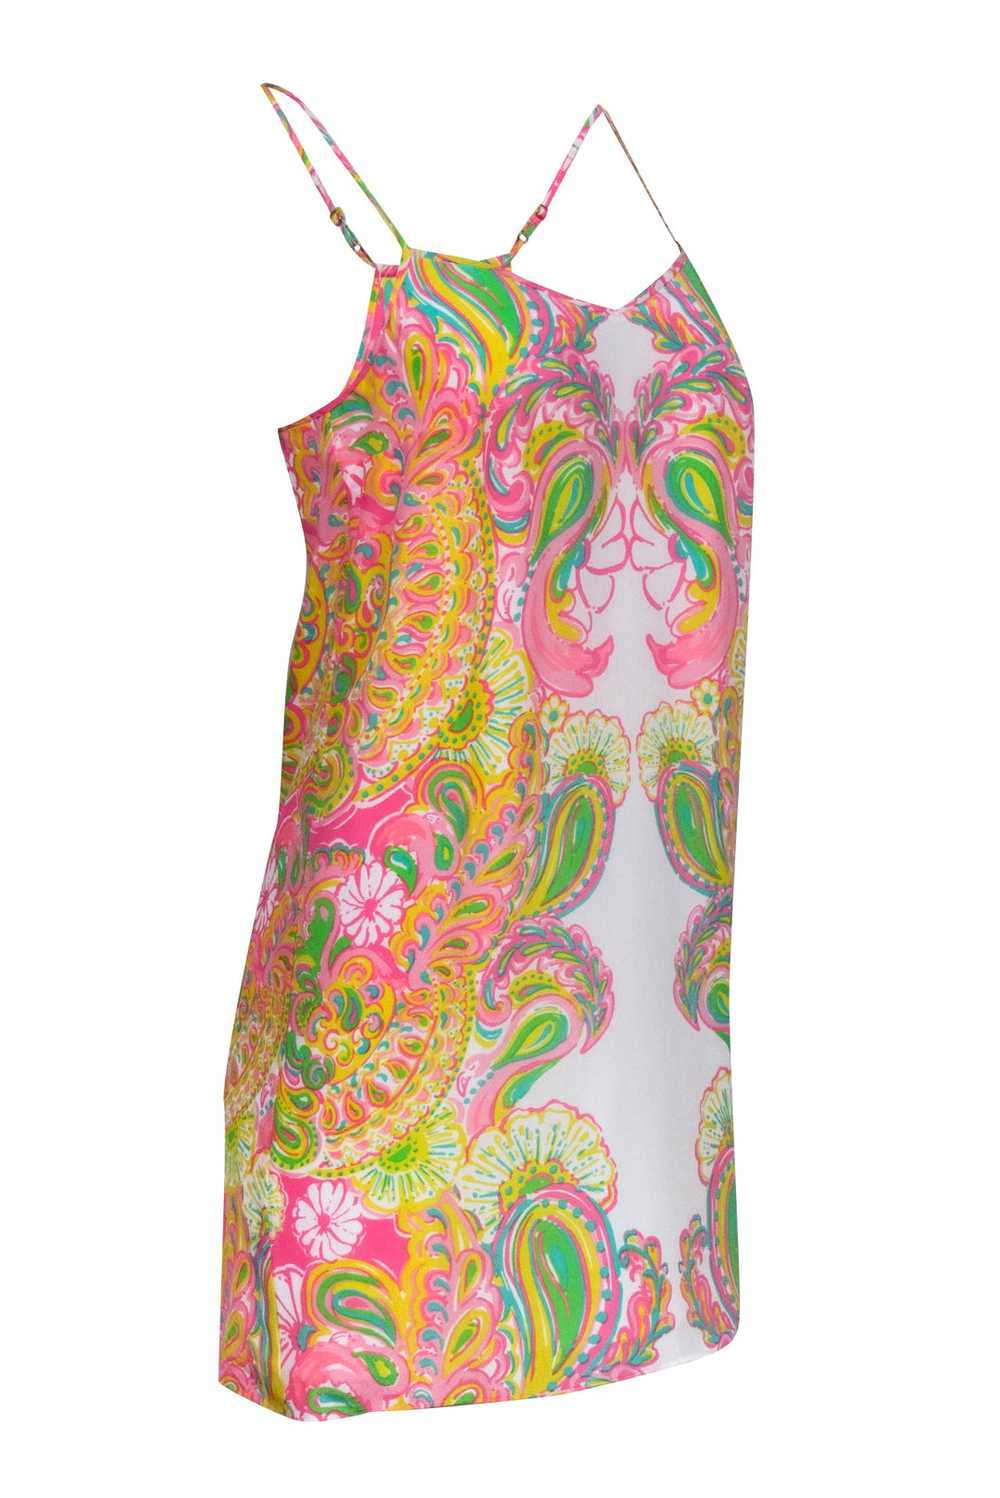 Lilly Pulitzer - Pink, White, & Yellow Paisley Pr… - image 2